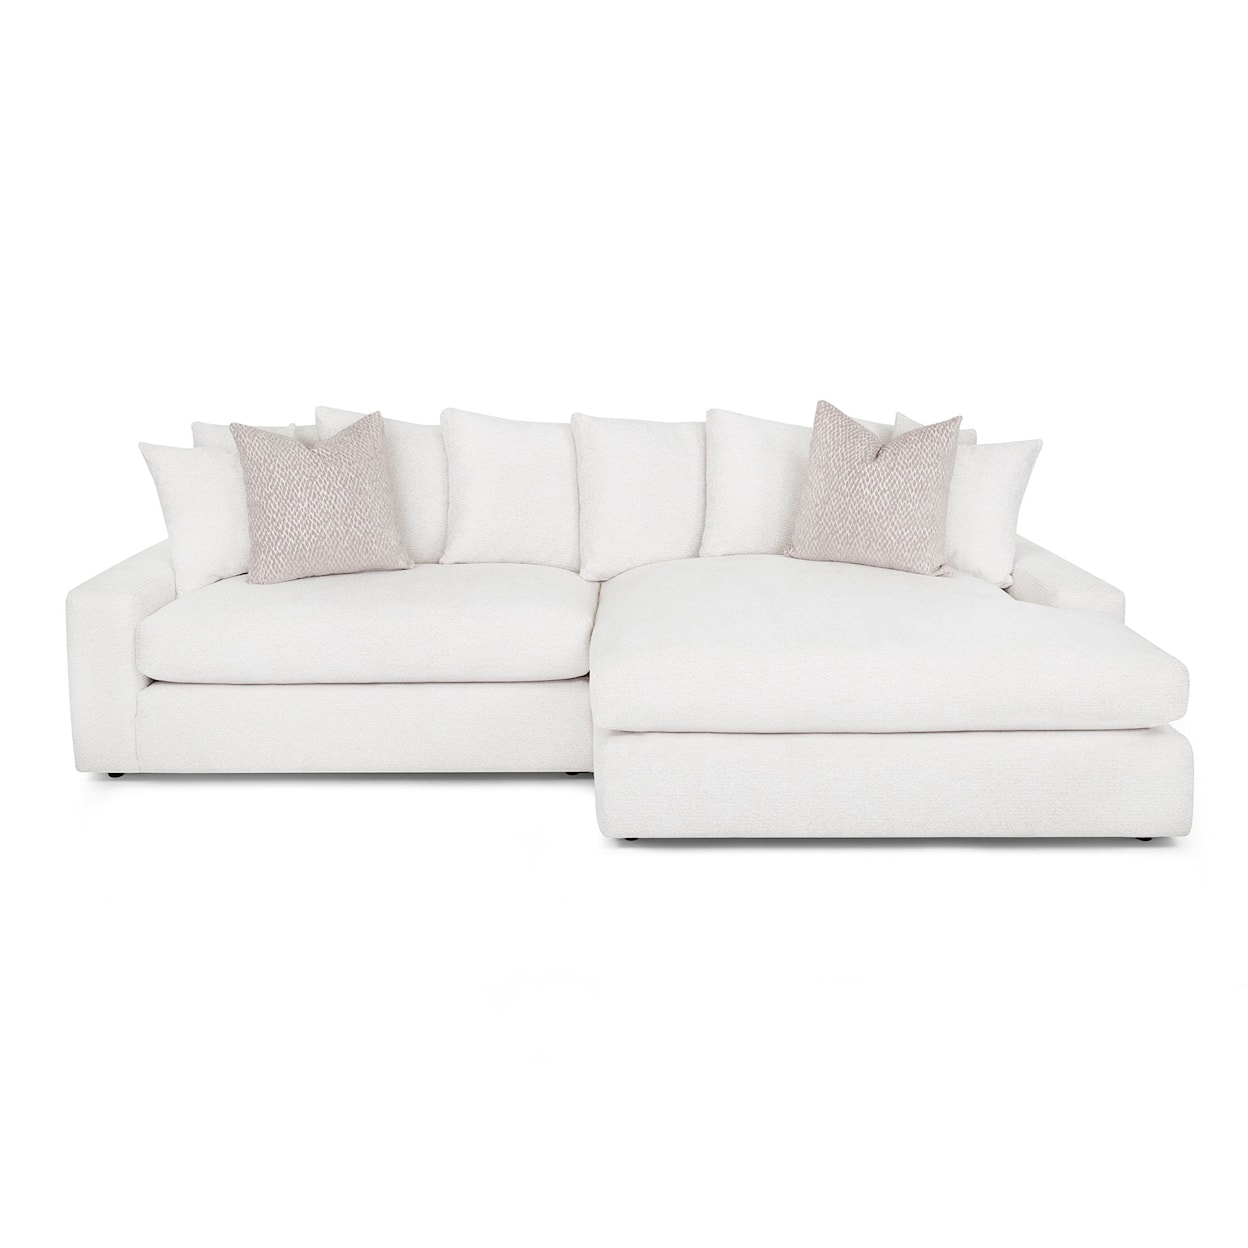 Franklin Pisces Sofa Chaise